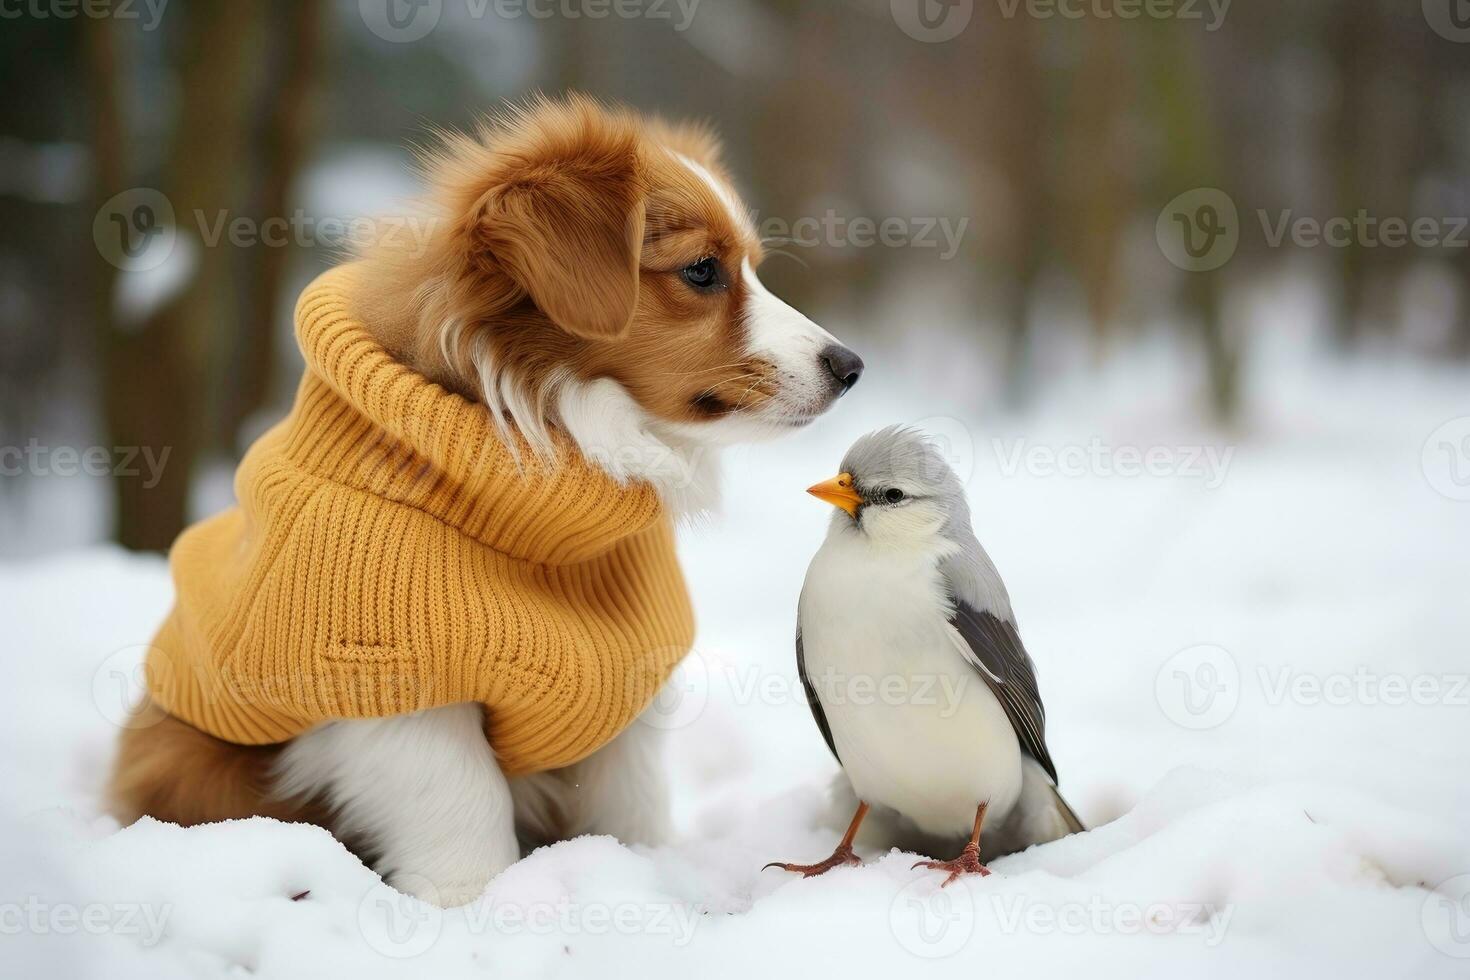 Ai generated puppy and bird friends in cold weather sitting on snow in snowy forest. A little dog and a birdie dressed in warm clothes play in the winter season. photo